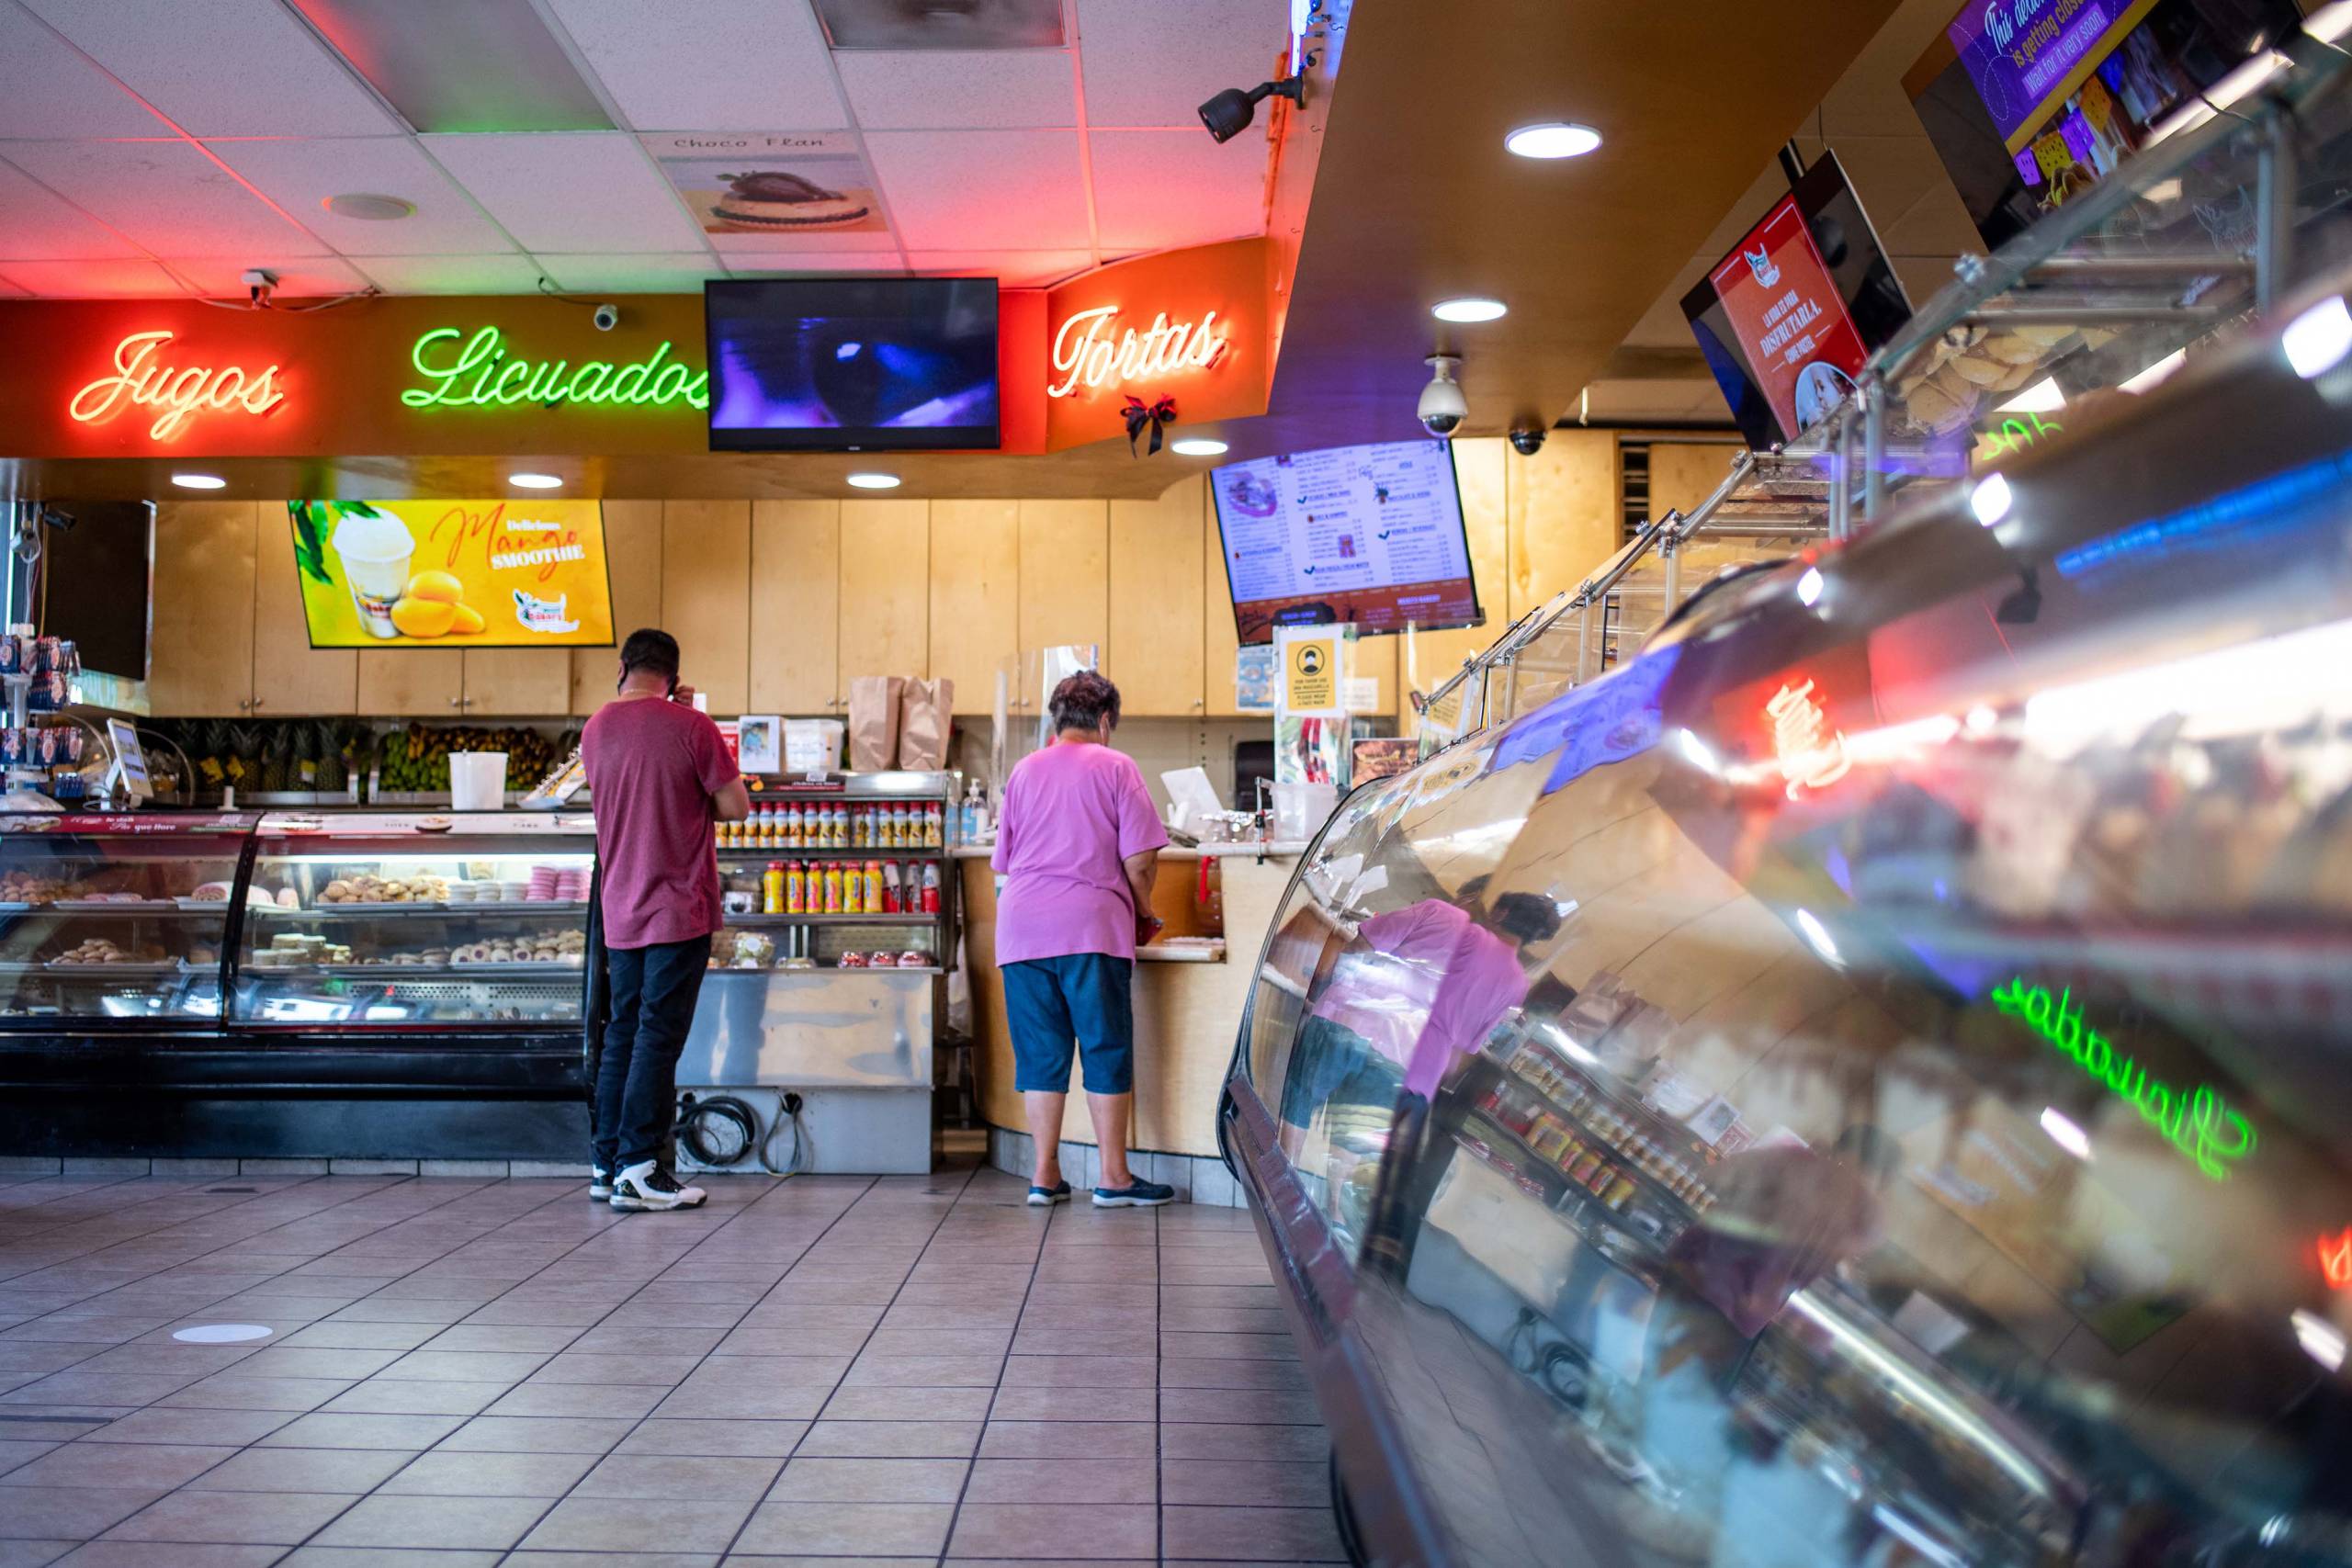 Interior of a Mexican bakery, with a display of cakes visible to the side.